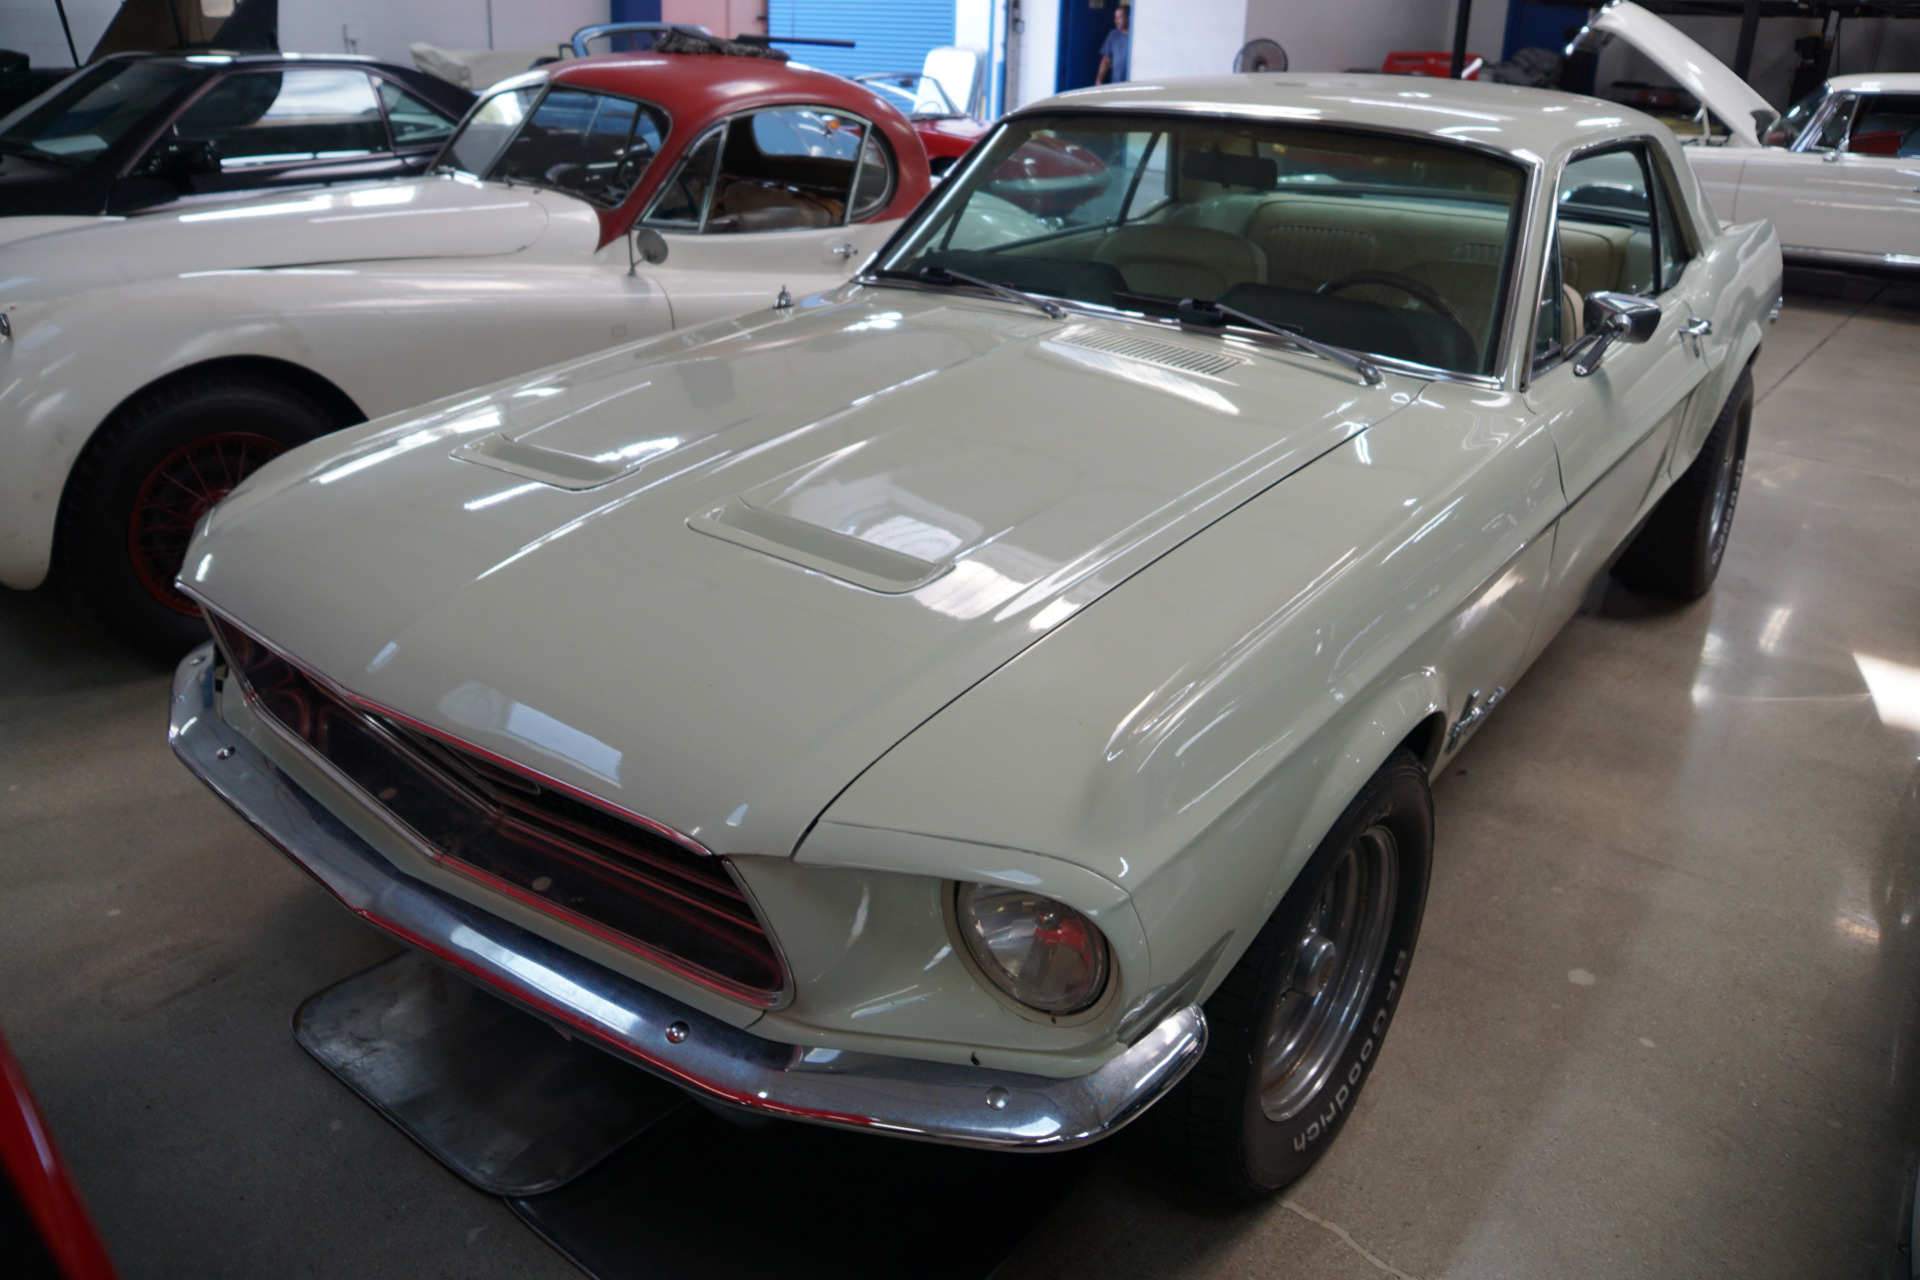 1968 Ford Mustang 289 V8 2 Door Coupe Stock # 5999 for sale near ...